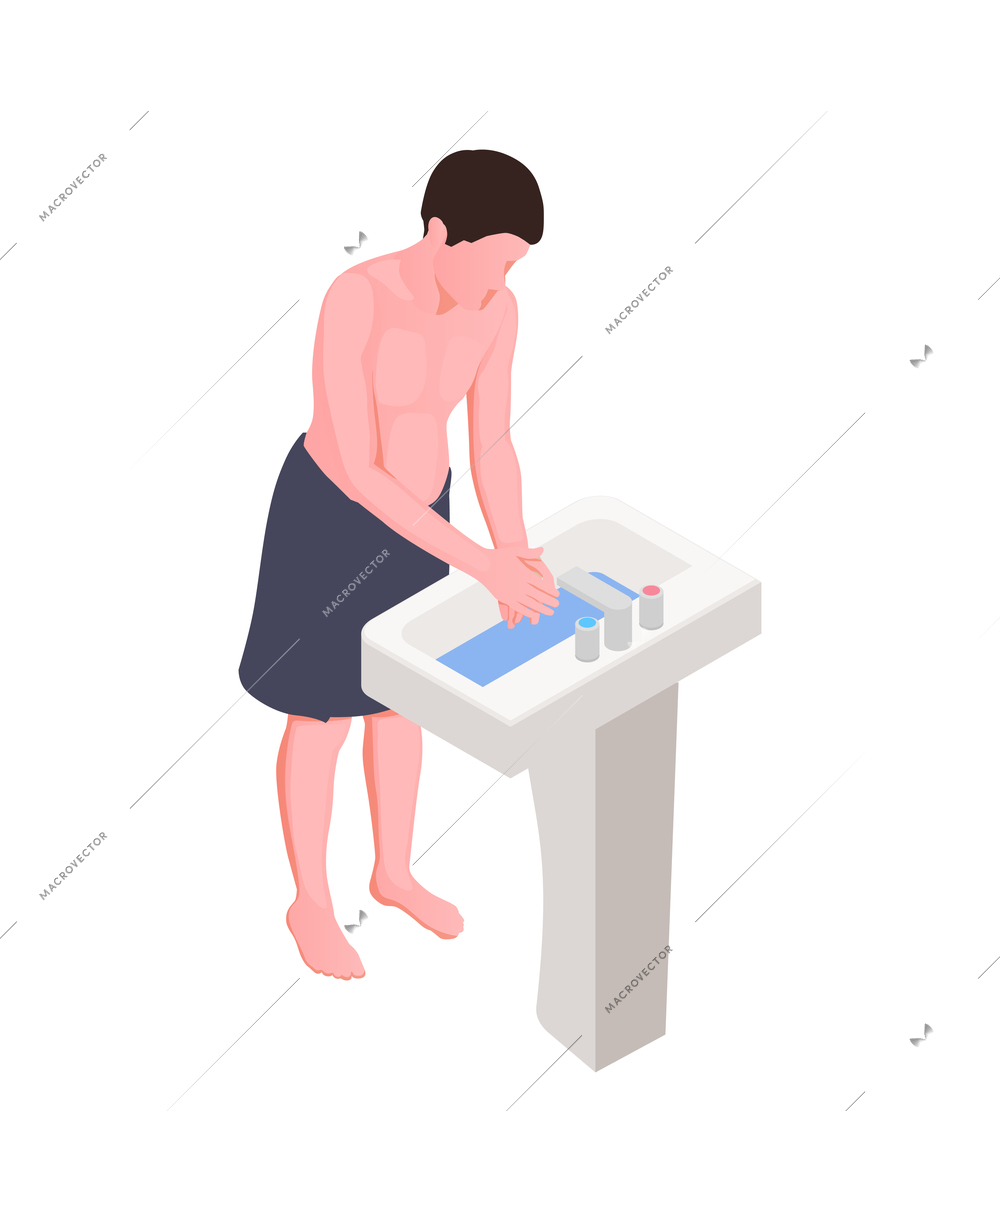 Hygiene isometric icon with man washing hands in sink 3d vector illustration